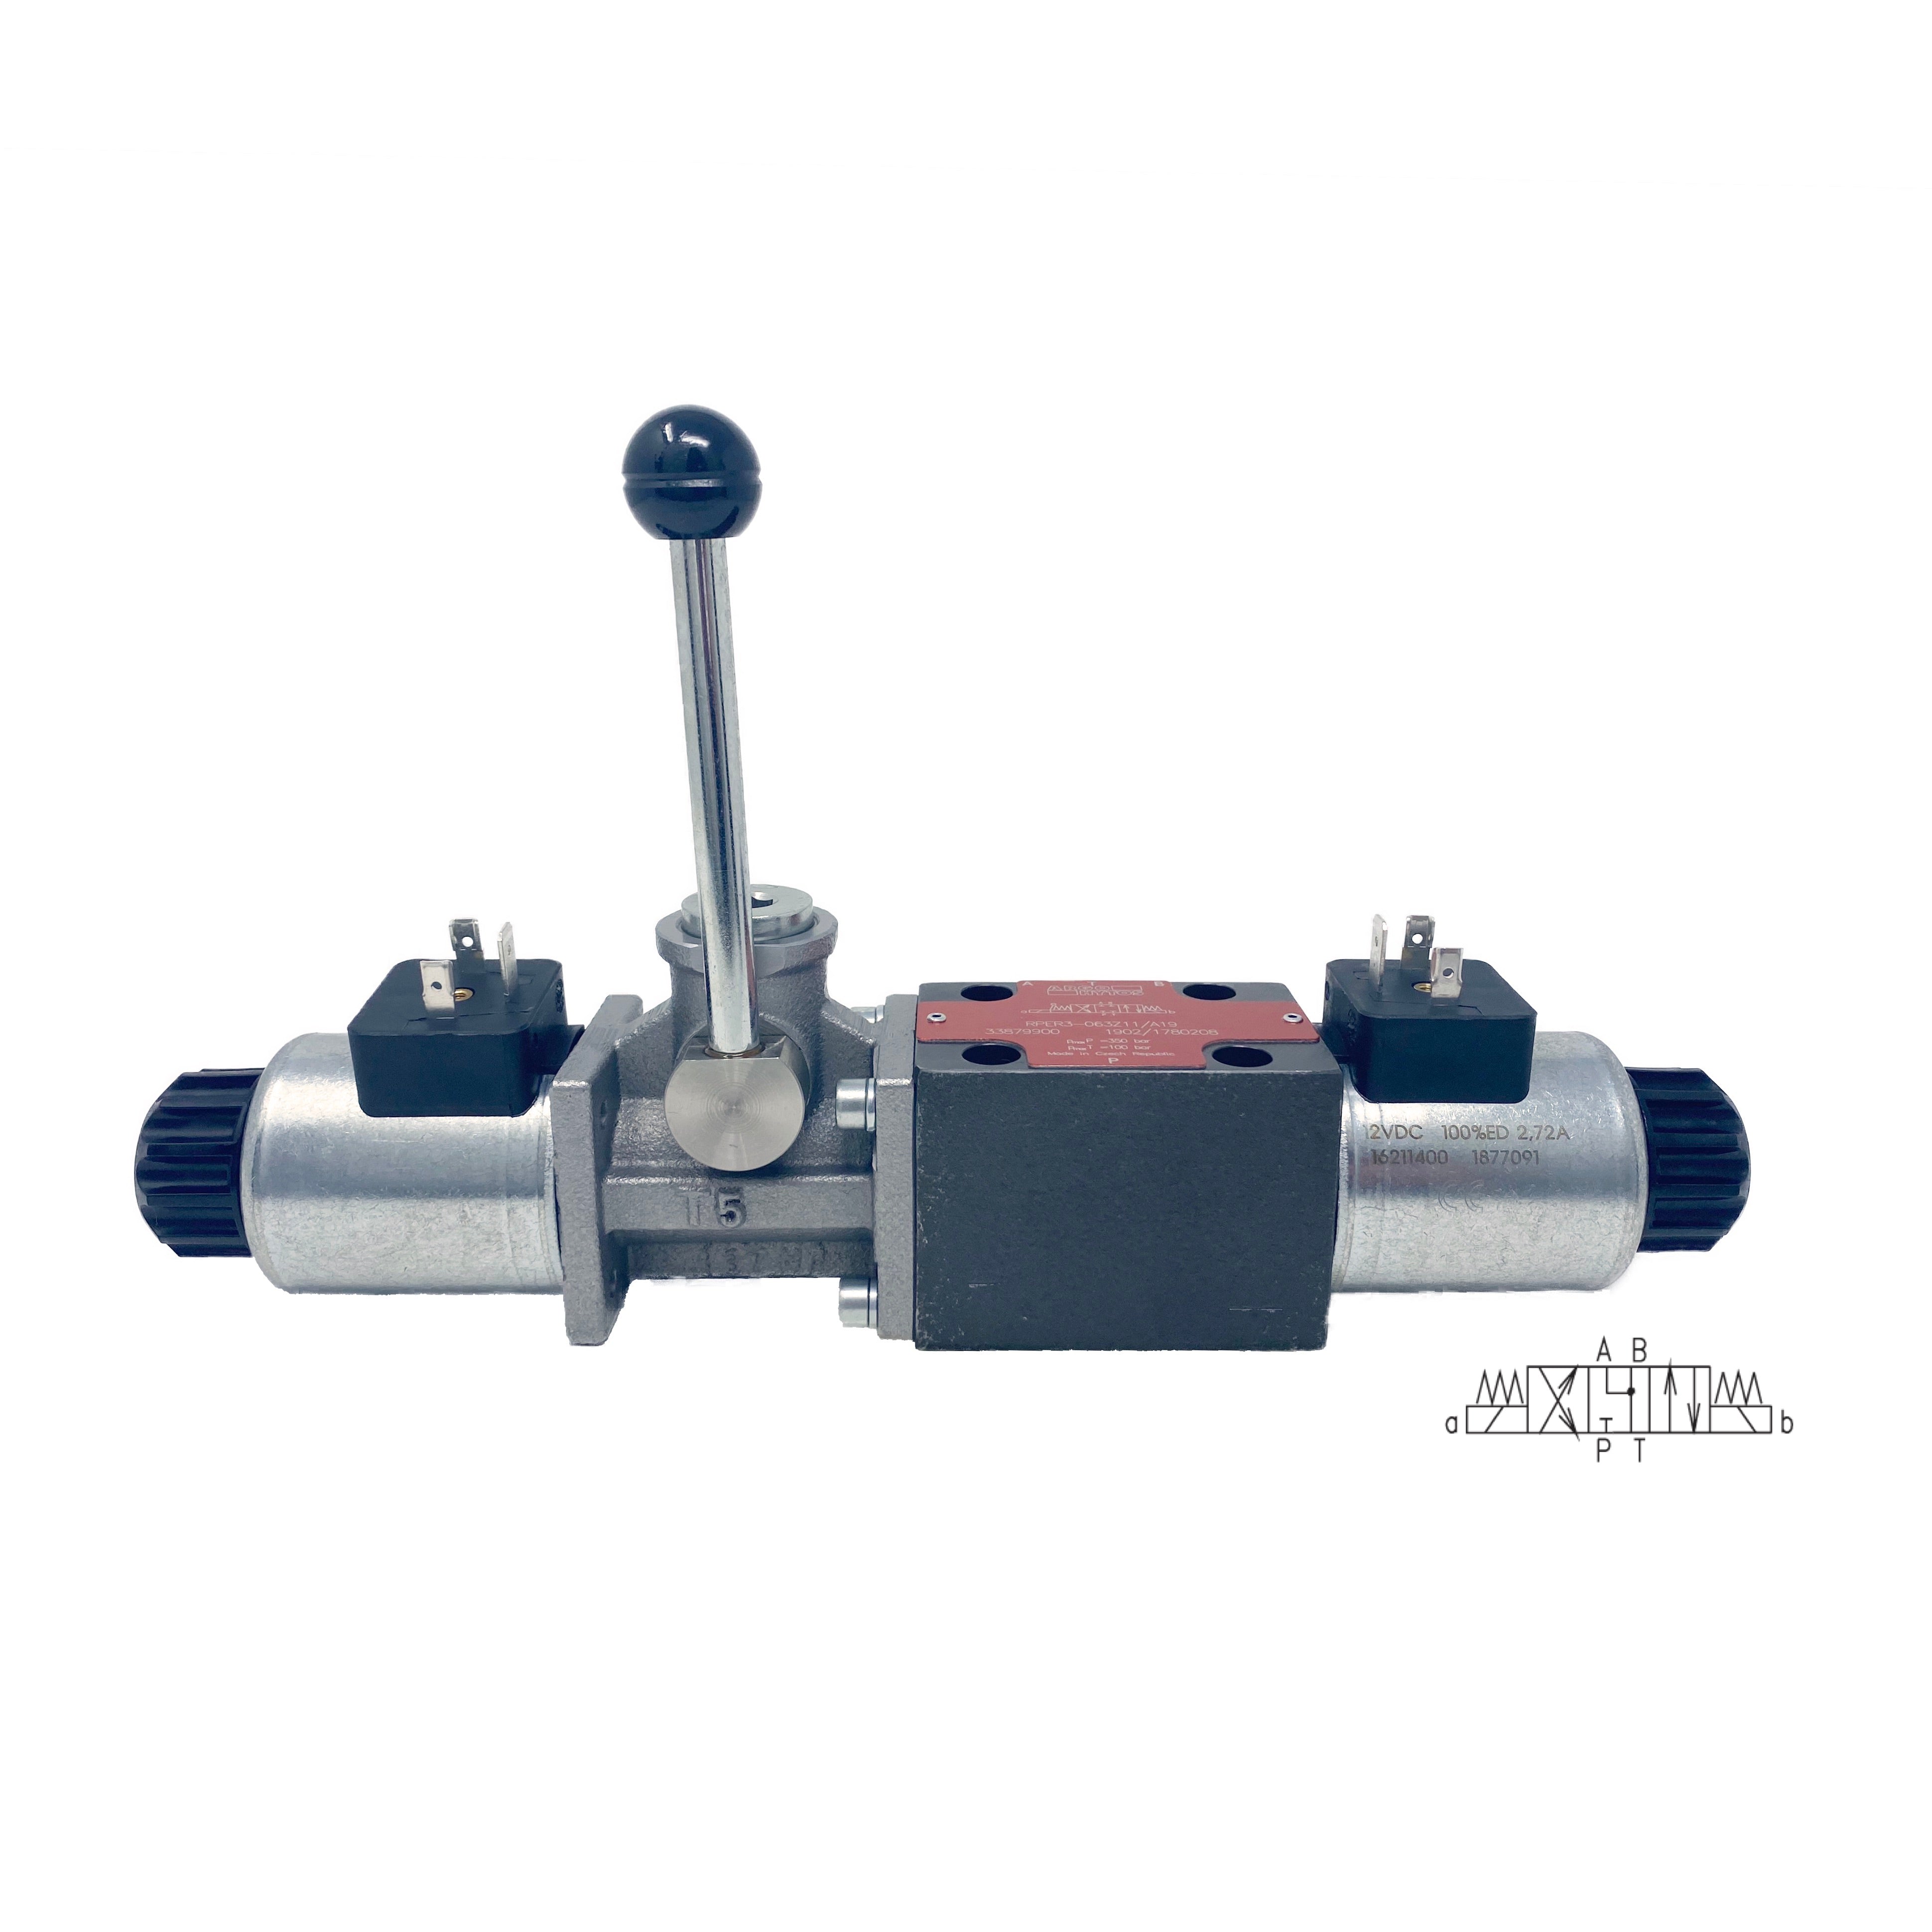 RPER3-063Y11/02400E1/A19 : Argo Directional Control Valve w/ Override Lever, D03, 21GPM, 5100psi, 3P4W, 24 VDC, DIN, Spring Centered, Motor Spool